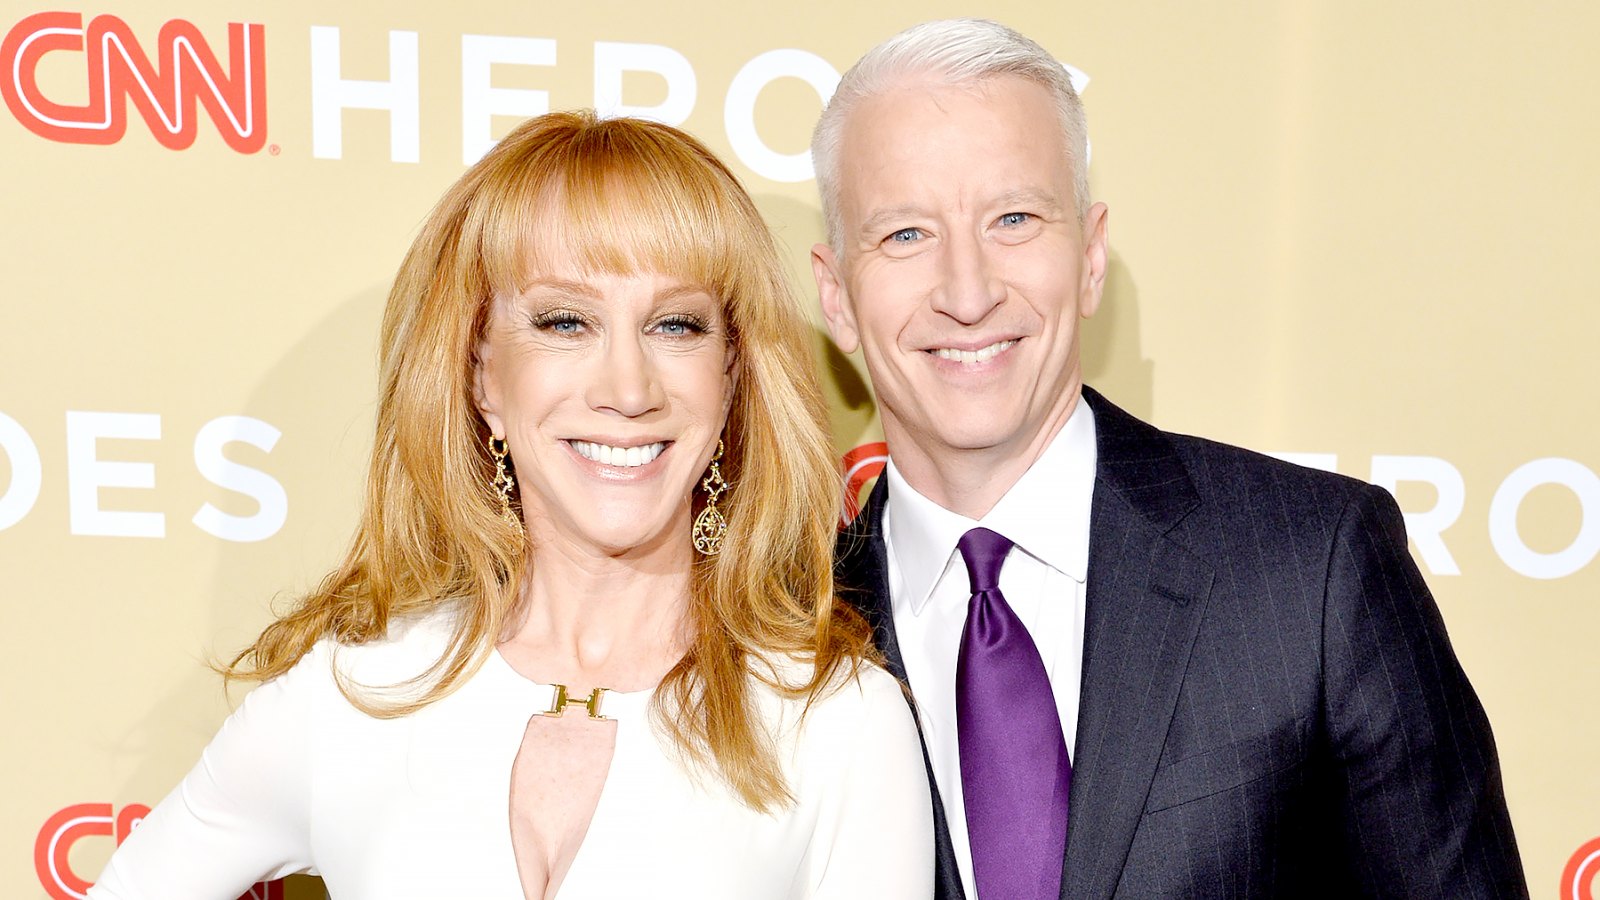 Kathy Griffin and Anderson Cooper attend the 2014 CNN Heroes: An All Star Tribute at American Museum of Natural History on November 18, 2014 in New York City.